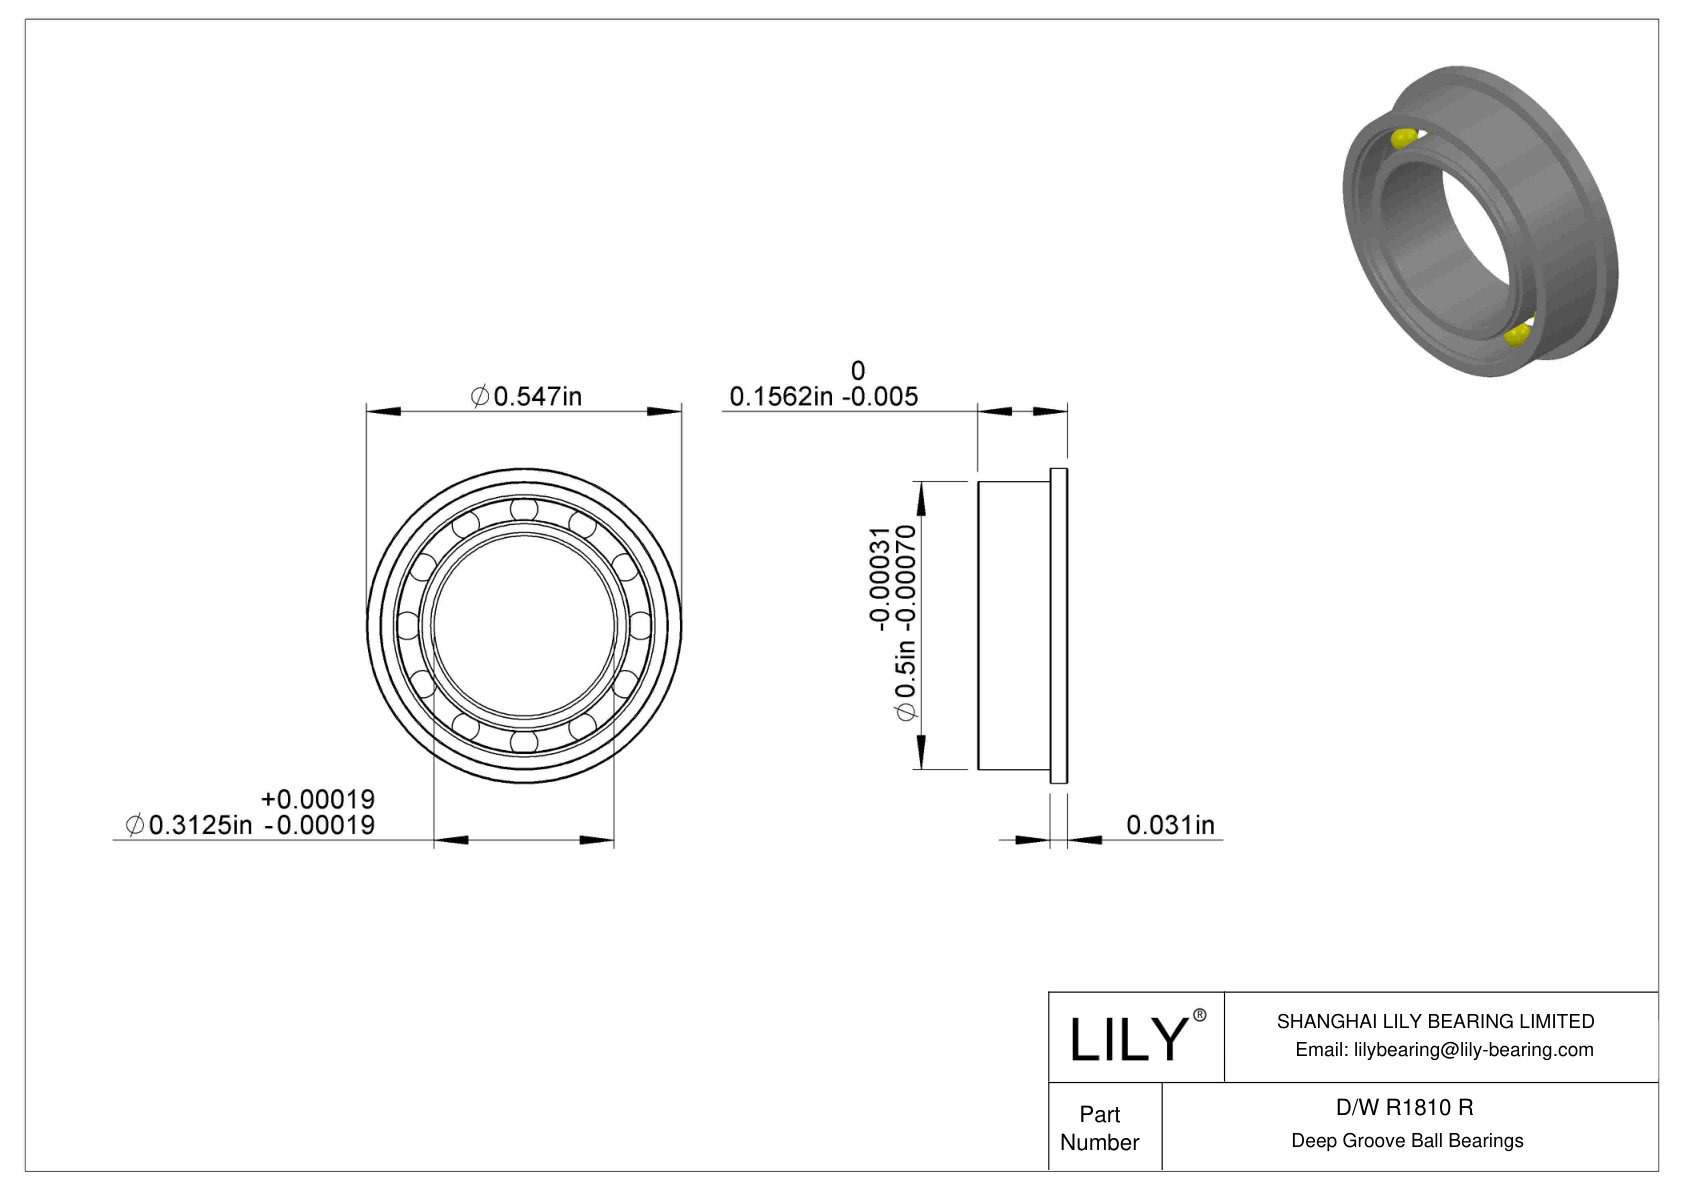 D/W R1810 R Flanged Ball Bearings cad drawing